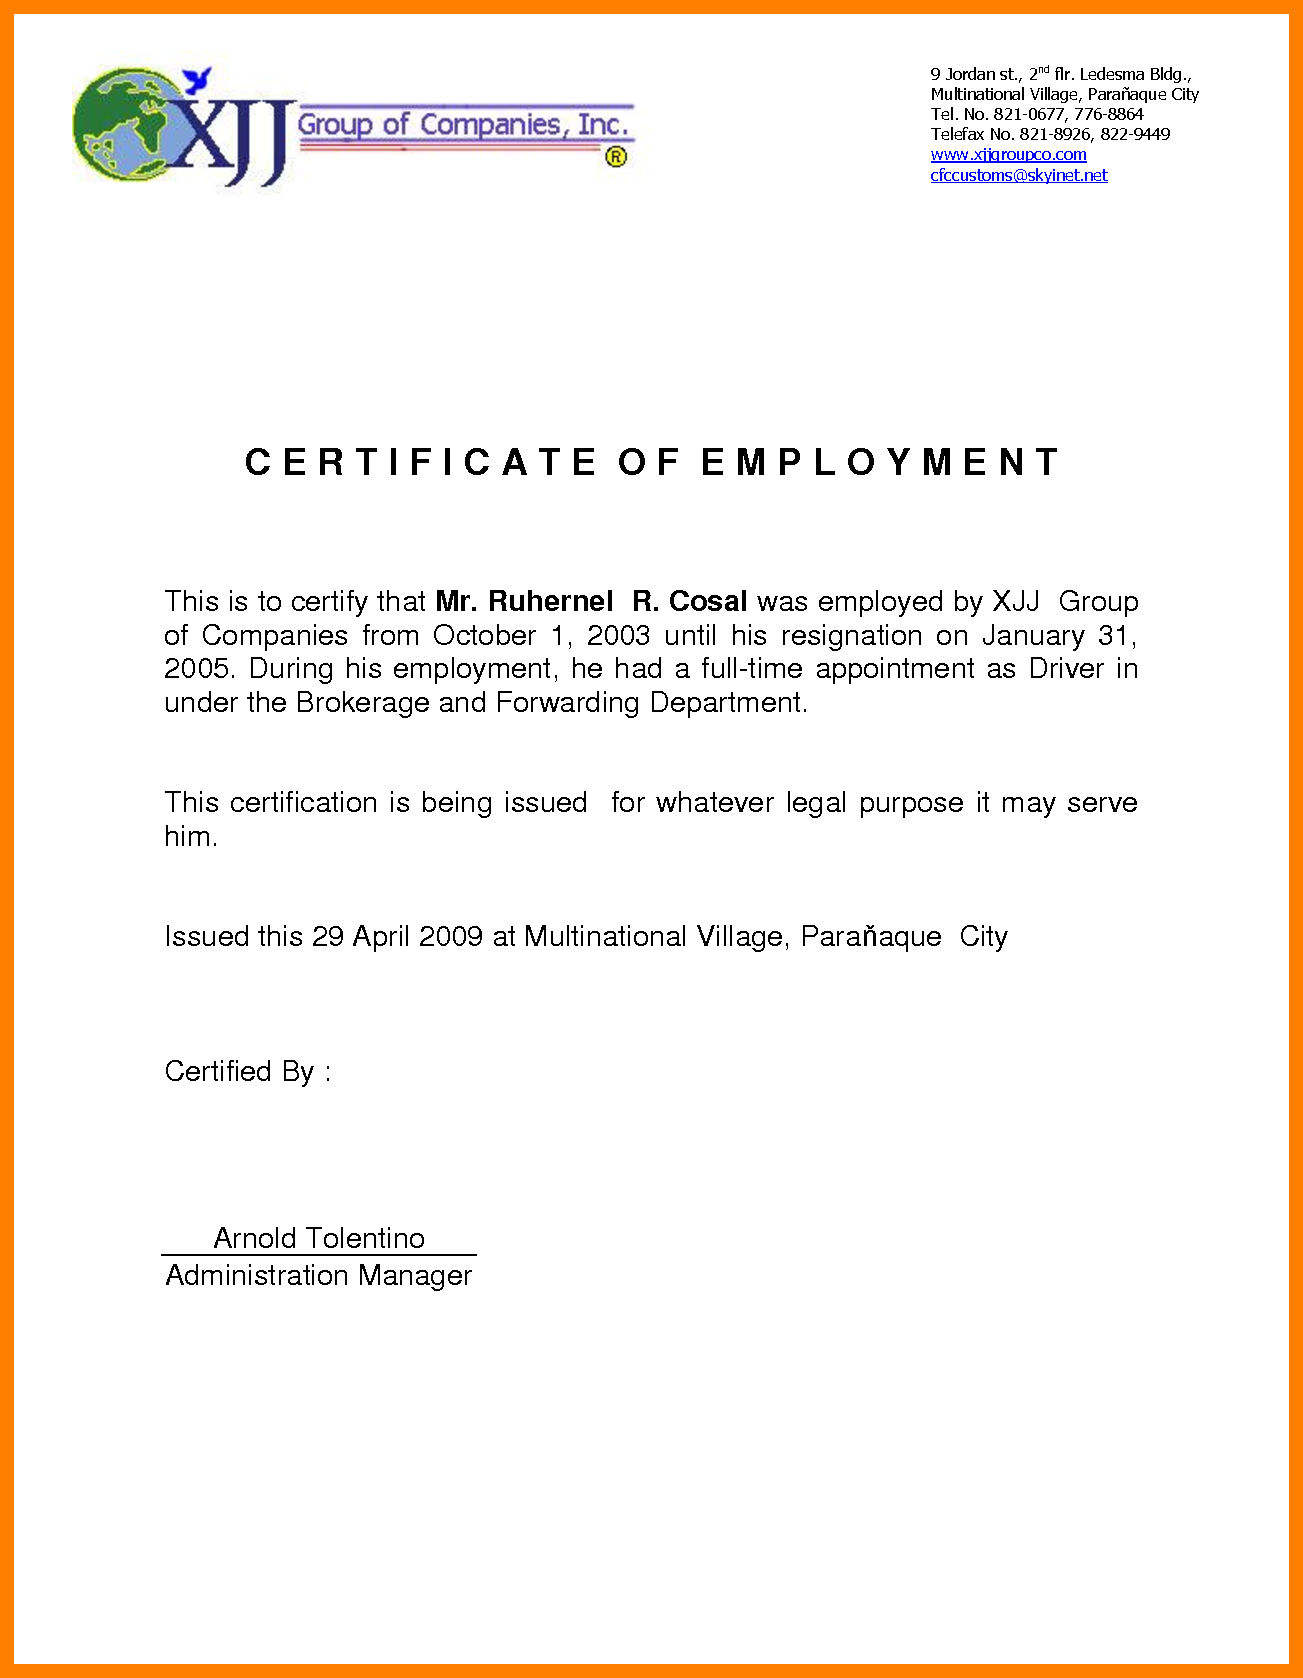 Certificate Of Employment Sample certificates templates free